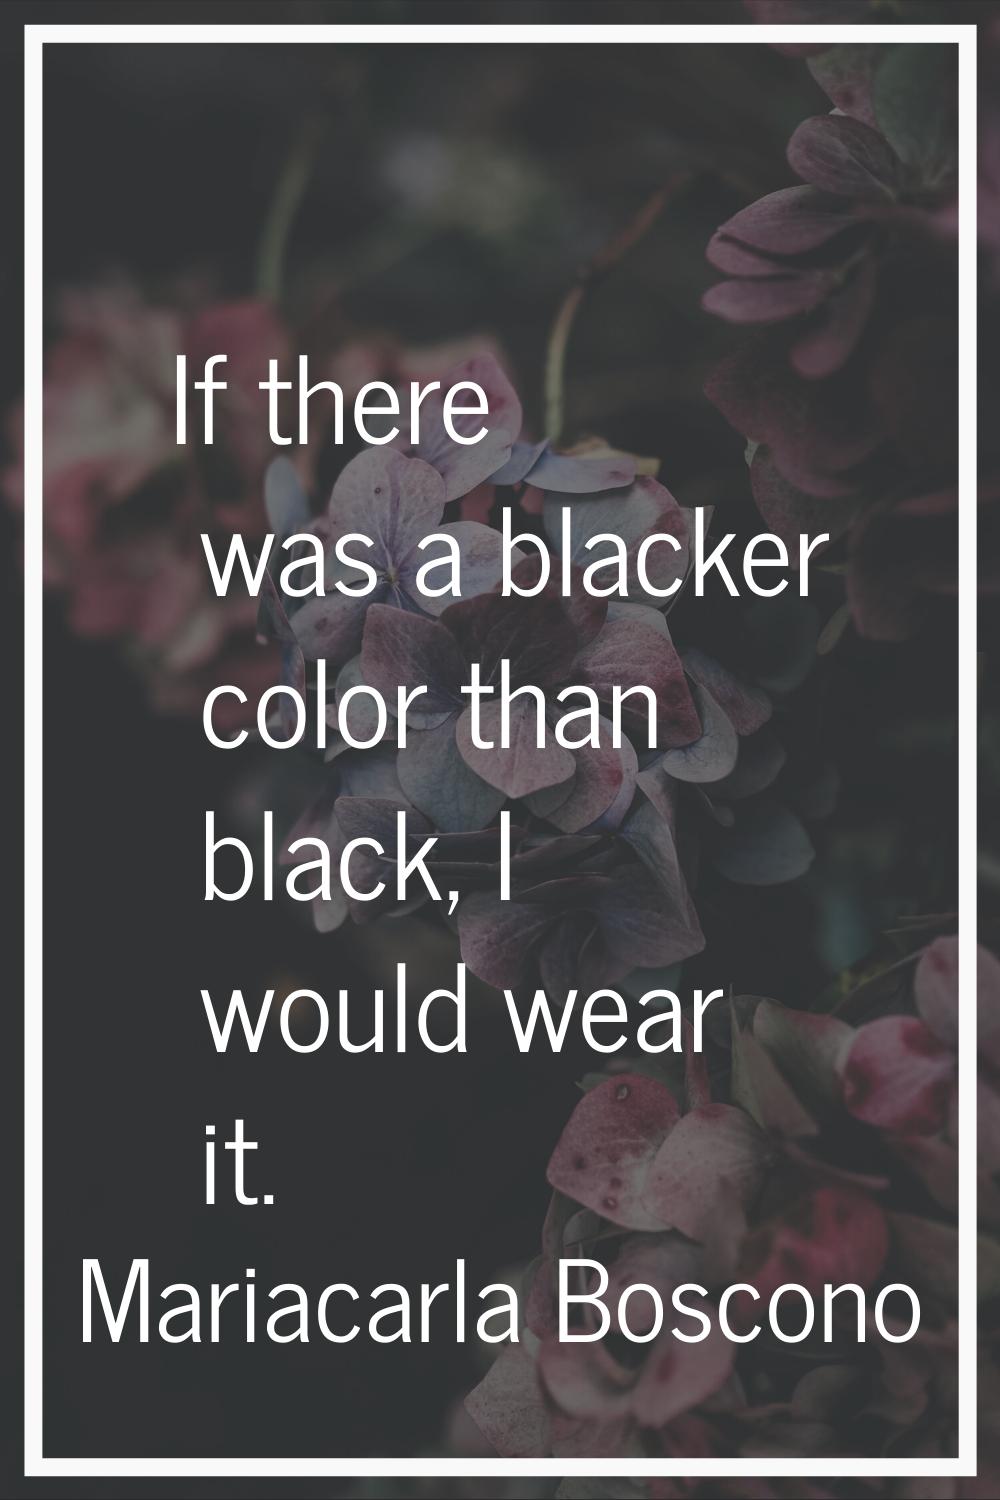 If there was a blacker color than black, I would wear it.